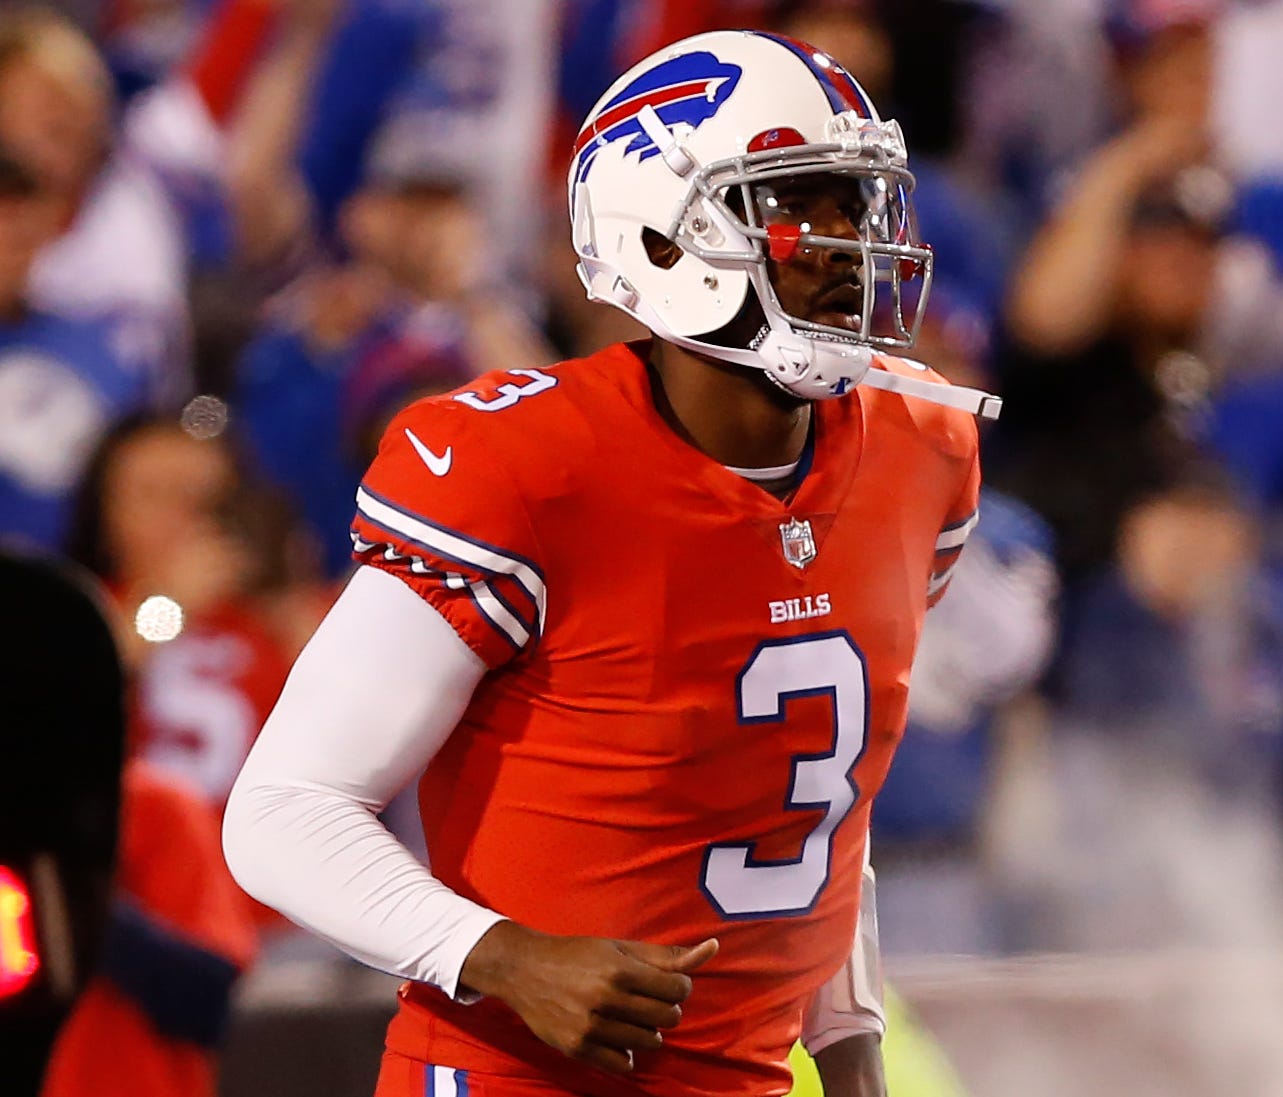 It was a surprise when the Bills made EJ Manuel the first quarterback taken in the 2013 draft.